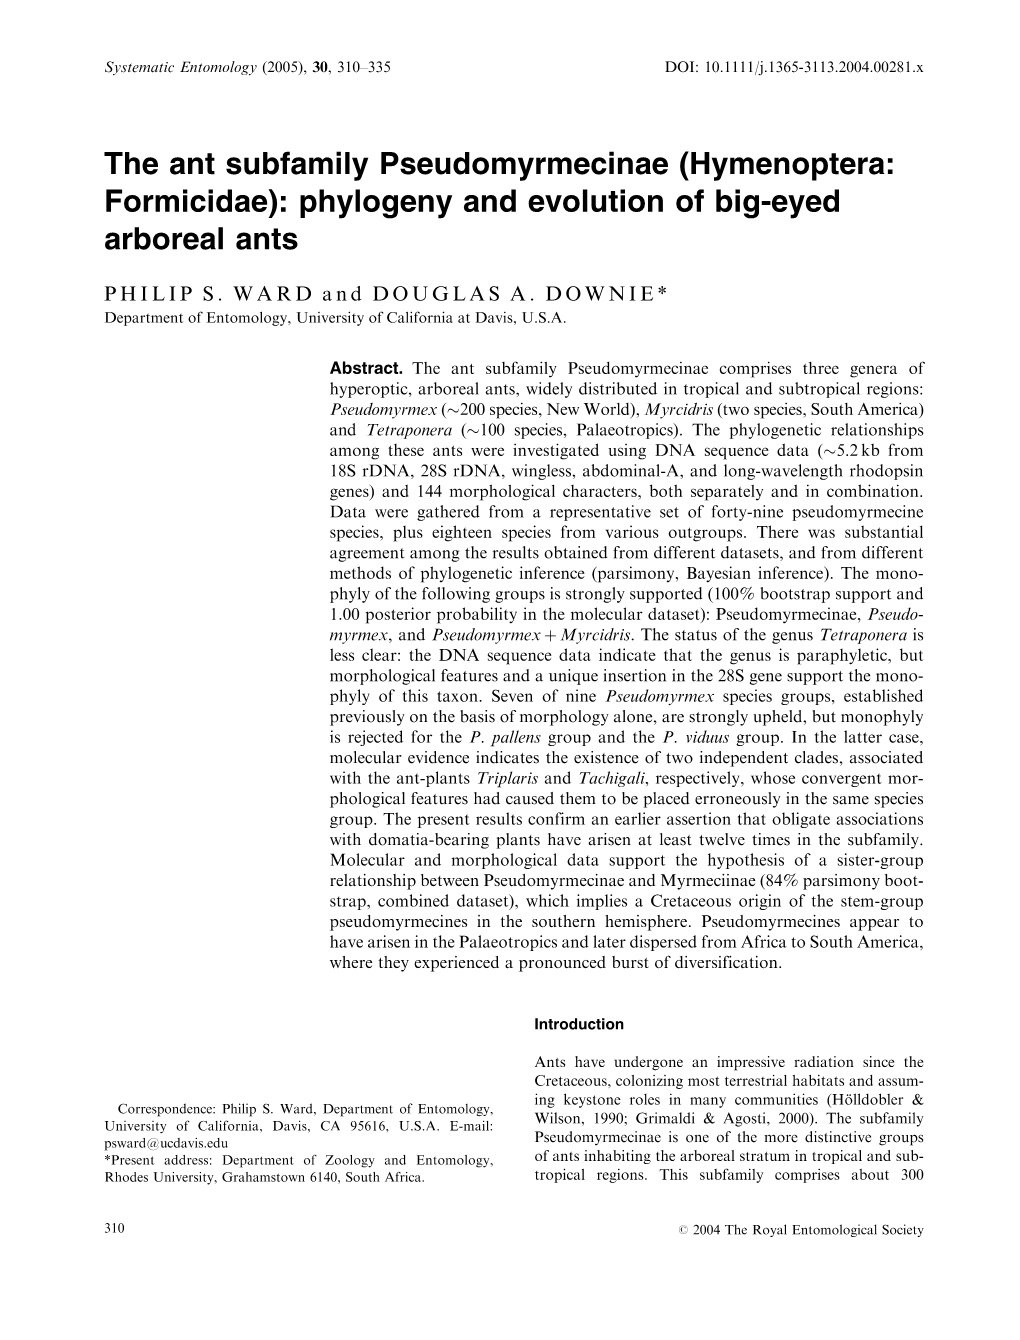 Phylogeny and Evolution of Big-Eyed Arboreal Ants